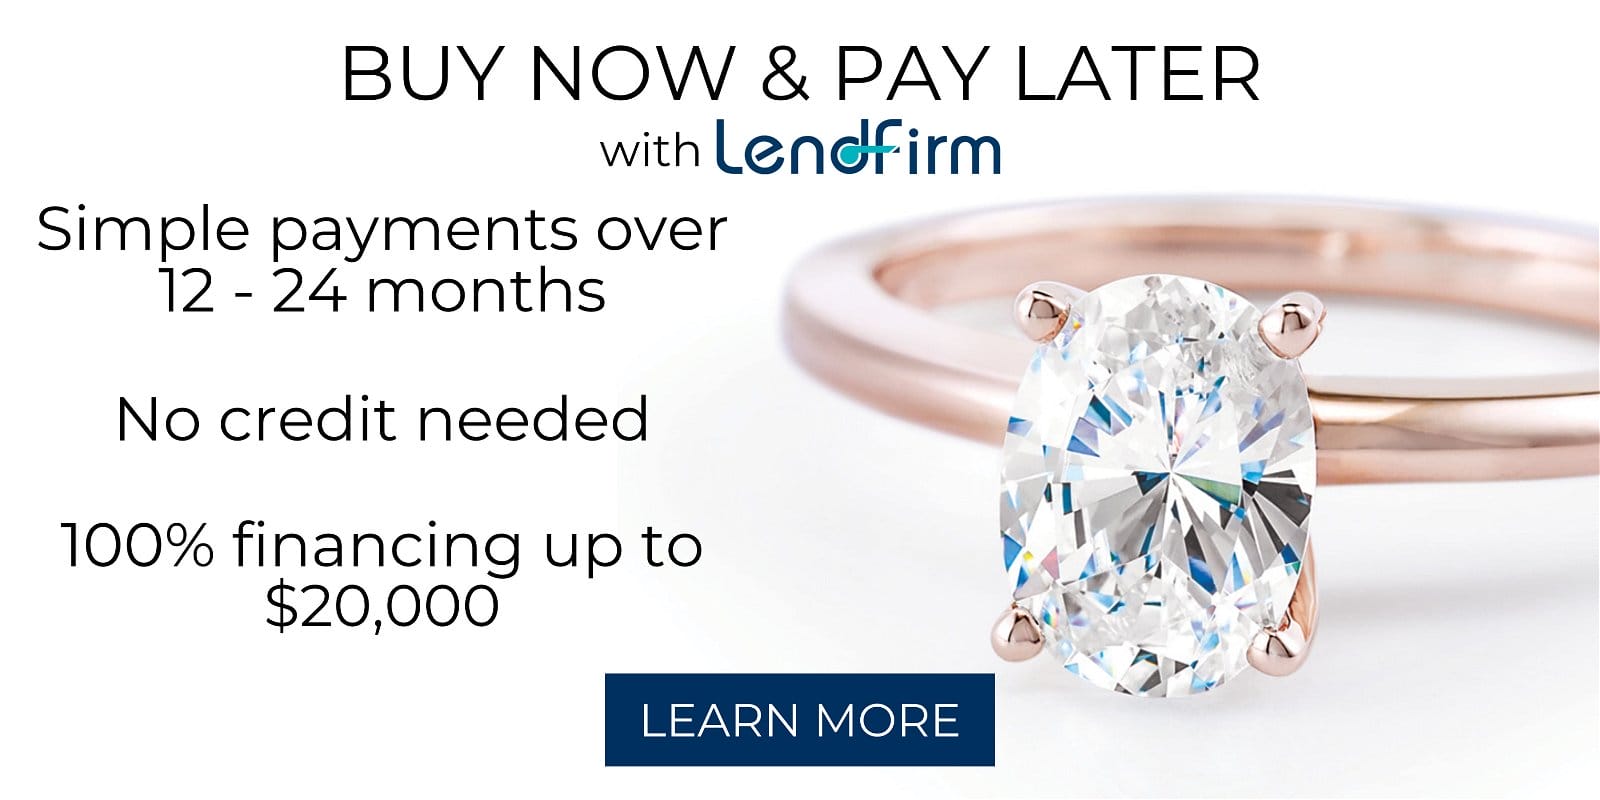 Buy now & pay later: simple payments over 12-24 months, no credit needed, 100% financing up to \\$20K.